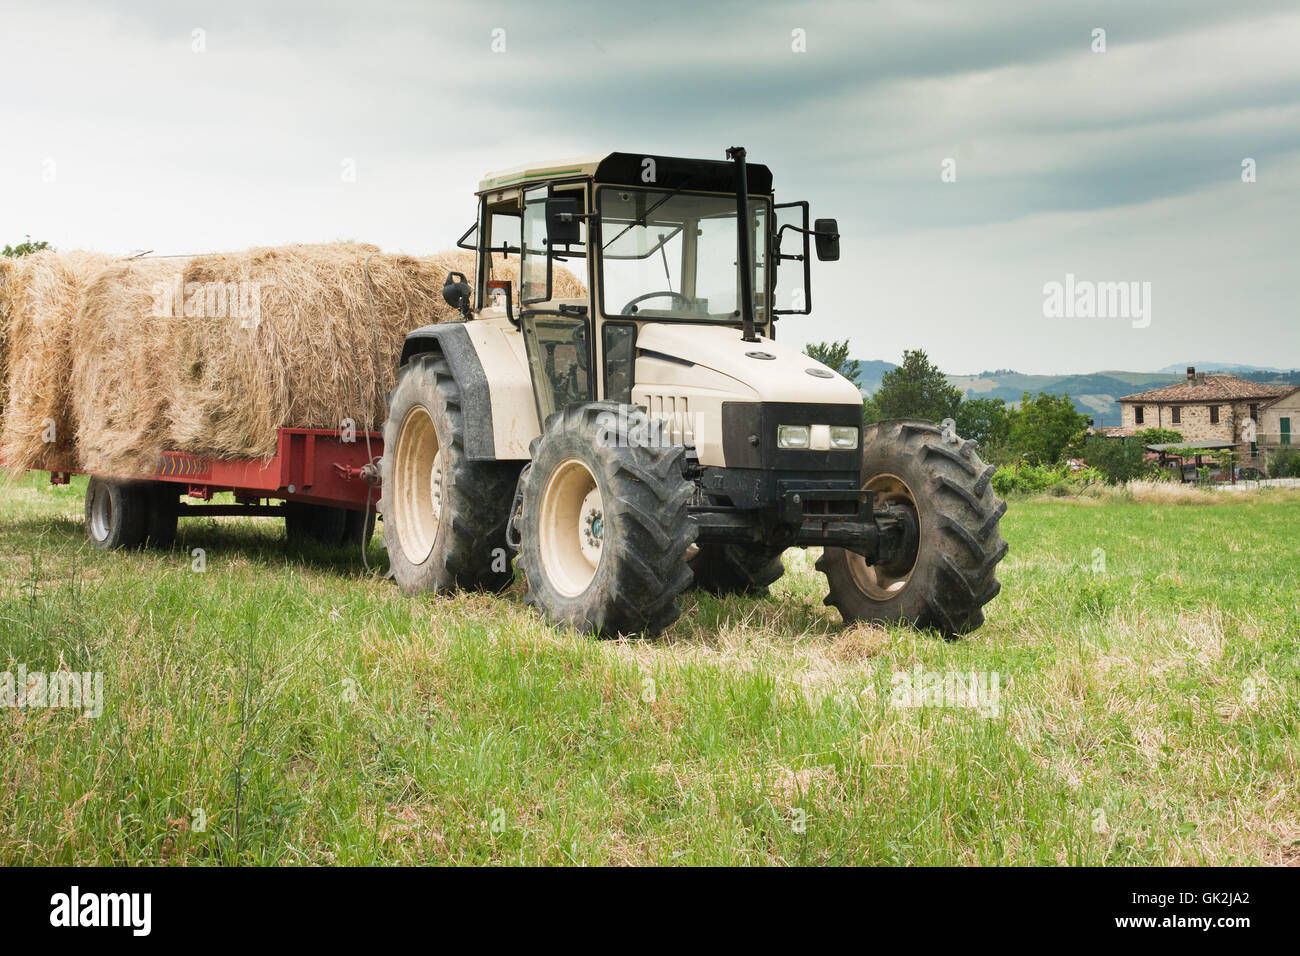 agriculture in the marche region,italy Stock Photo